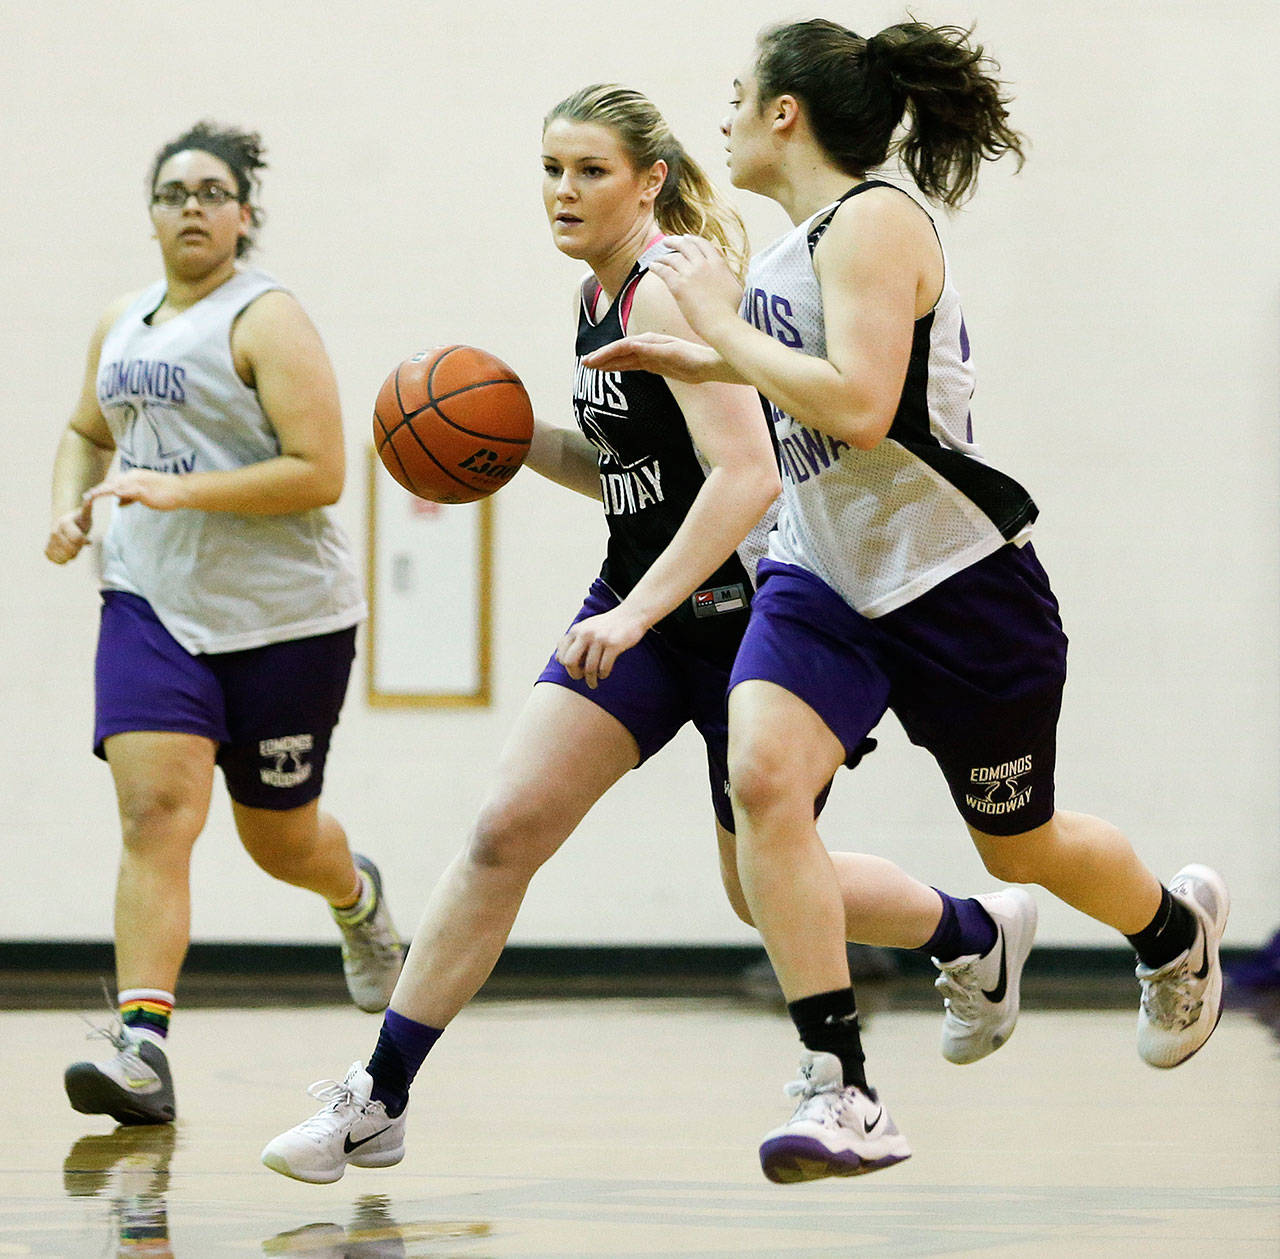 Seen here during a Feb. 2016 practice, Edmonds-Woodway’s Missy Peterson (center) takes the ball up court during a team practice at the school. Originally signed to play for Long Beach State, she was allowed out of her commitment to follow the school’s former coach to the University of Washington. (Ian Terry / The Herald)